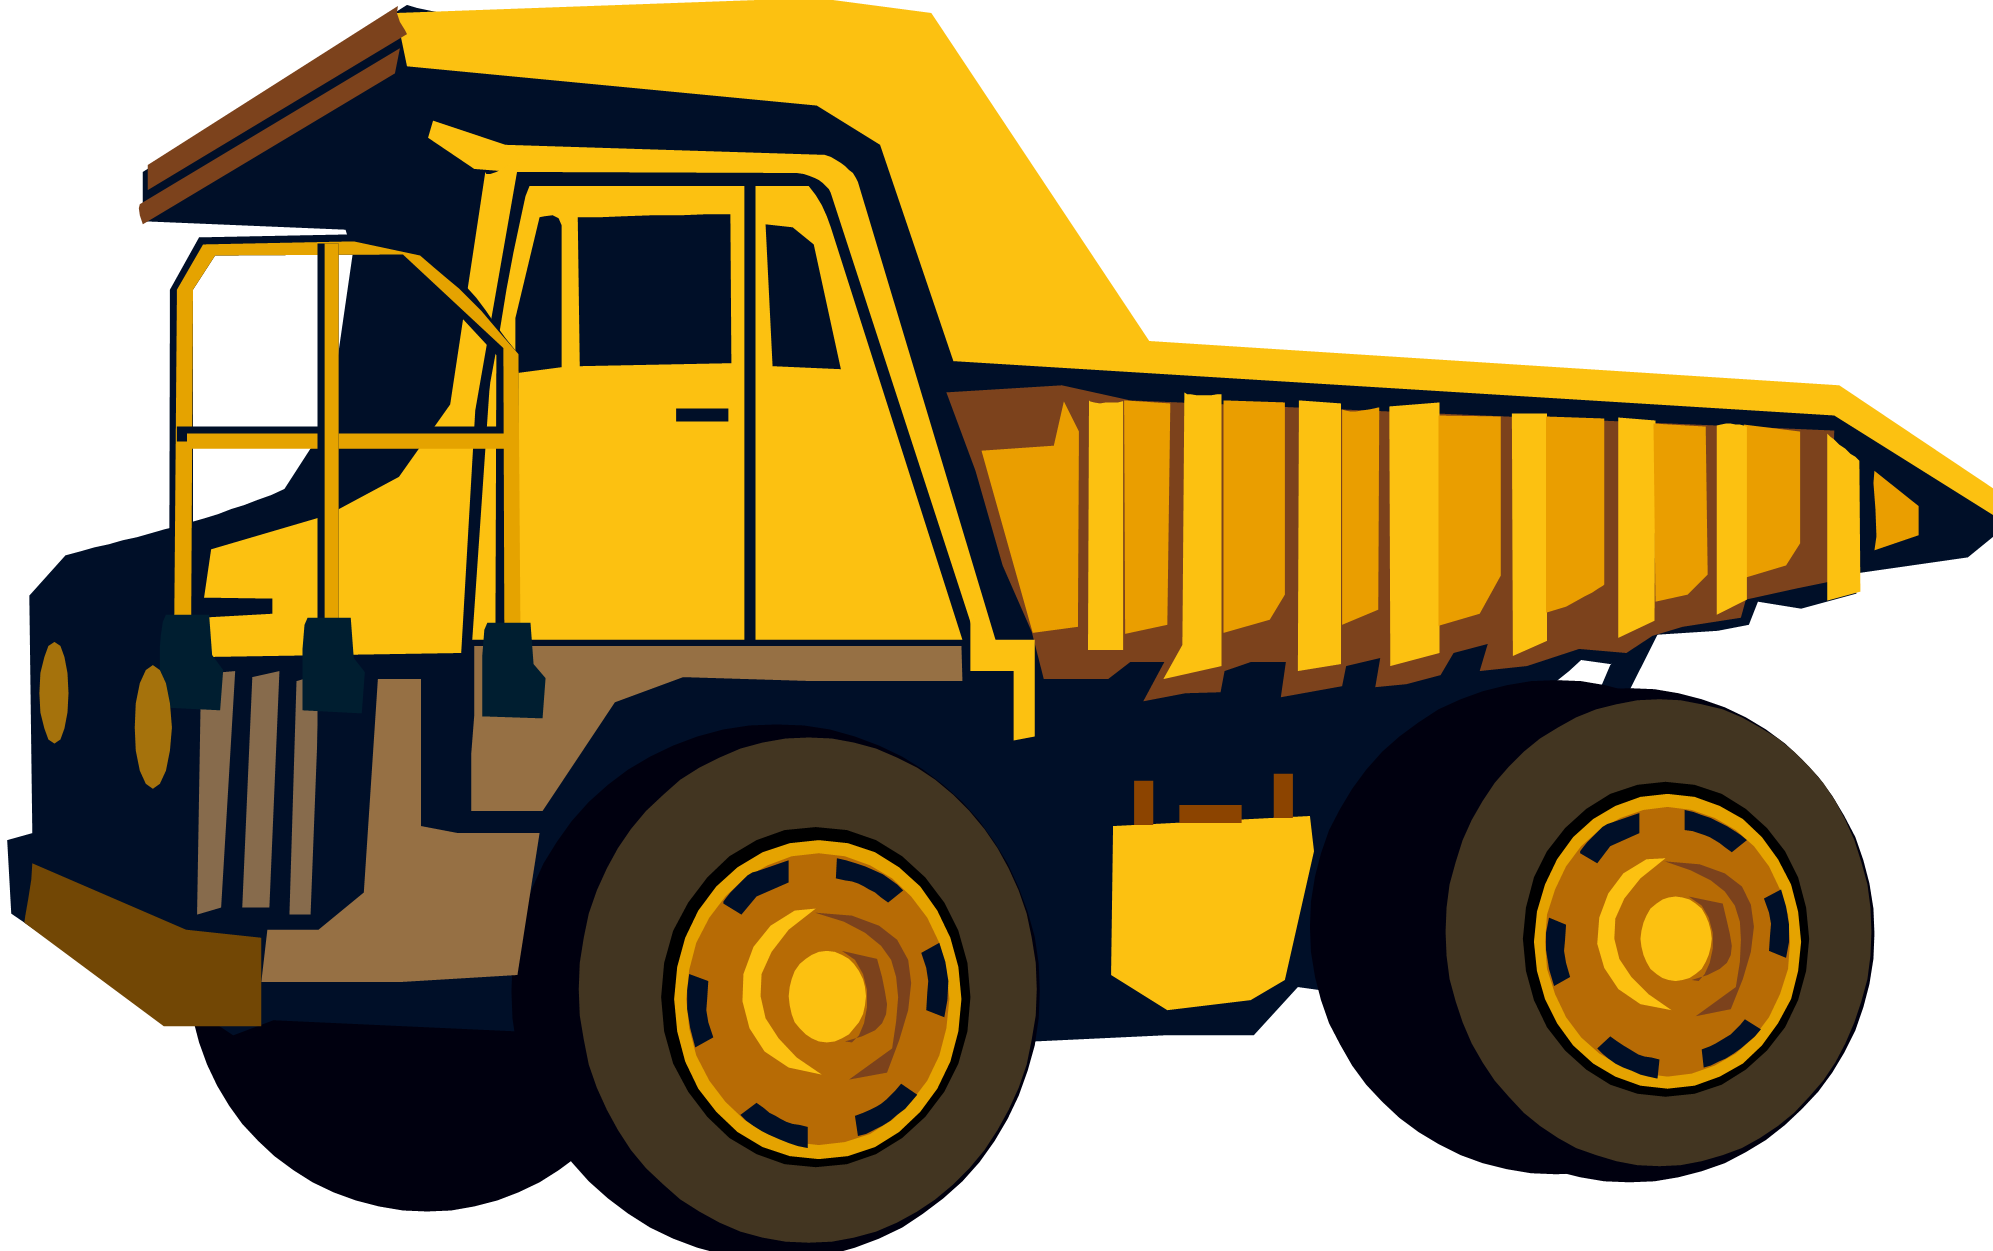 Free Construction Vehicle Cliparts, Download Free Clip Art